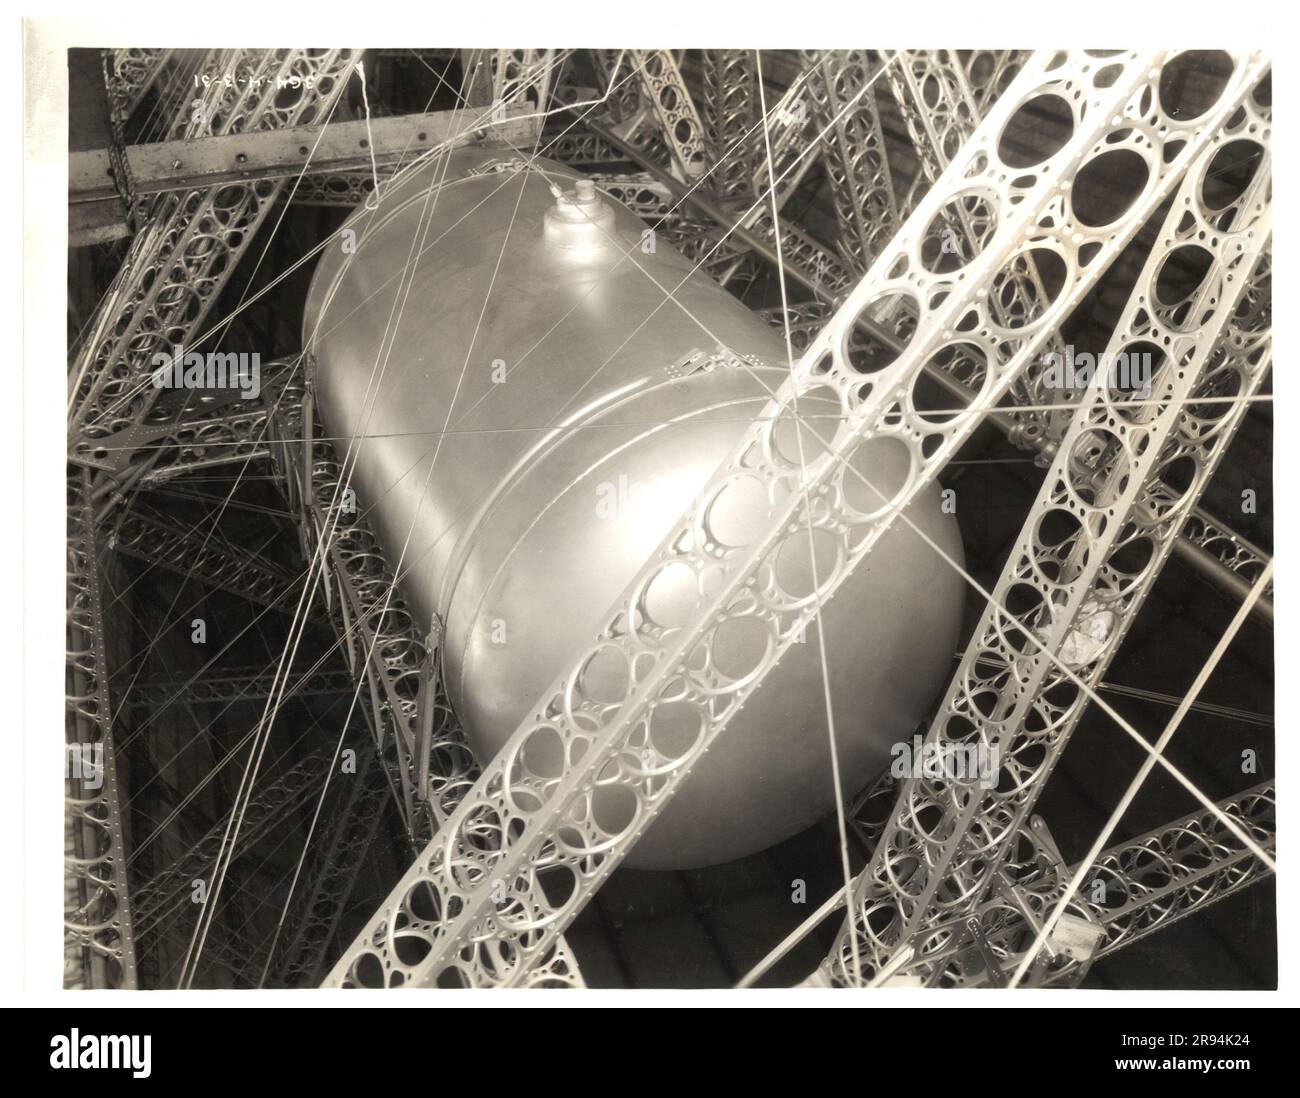 Photograph of a Oil Tank on the USS Akron. Original caption: One of the USS Akron's many oil tanks..  Dirigible Disasters. Stock Photo